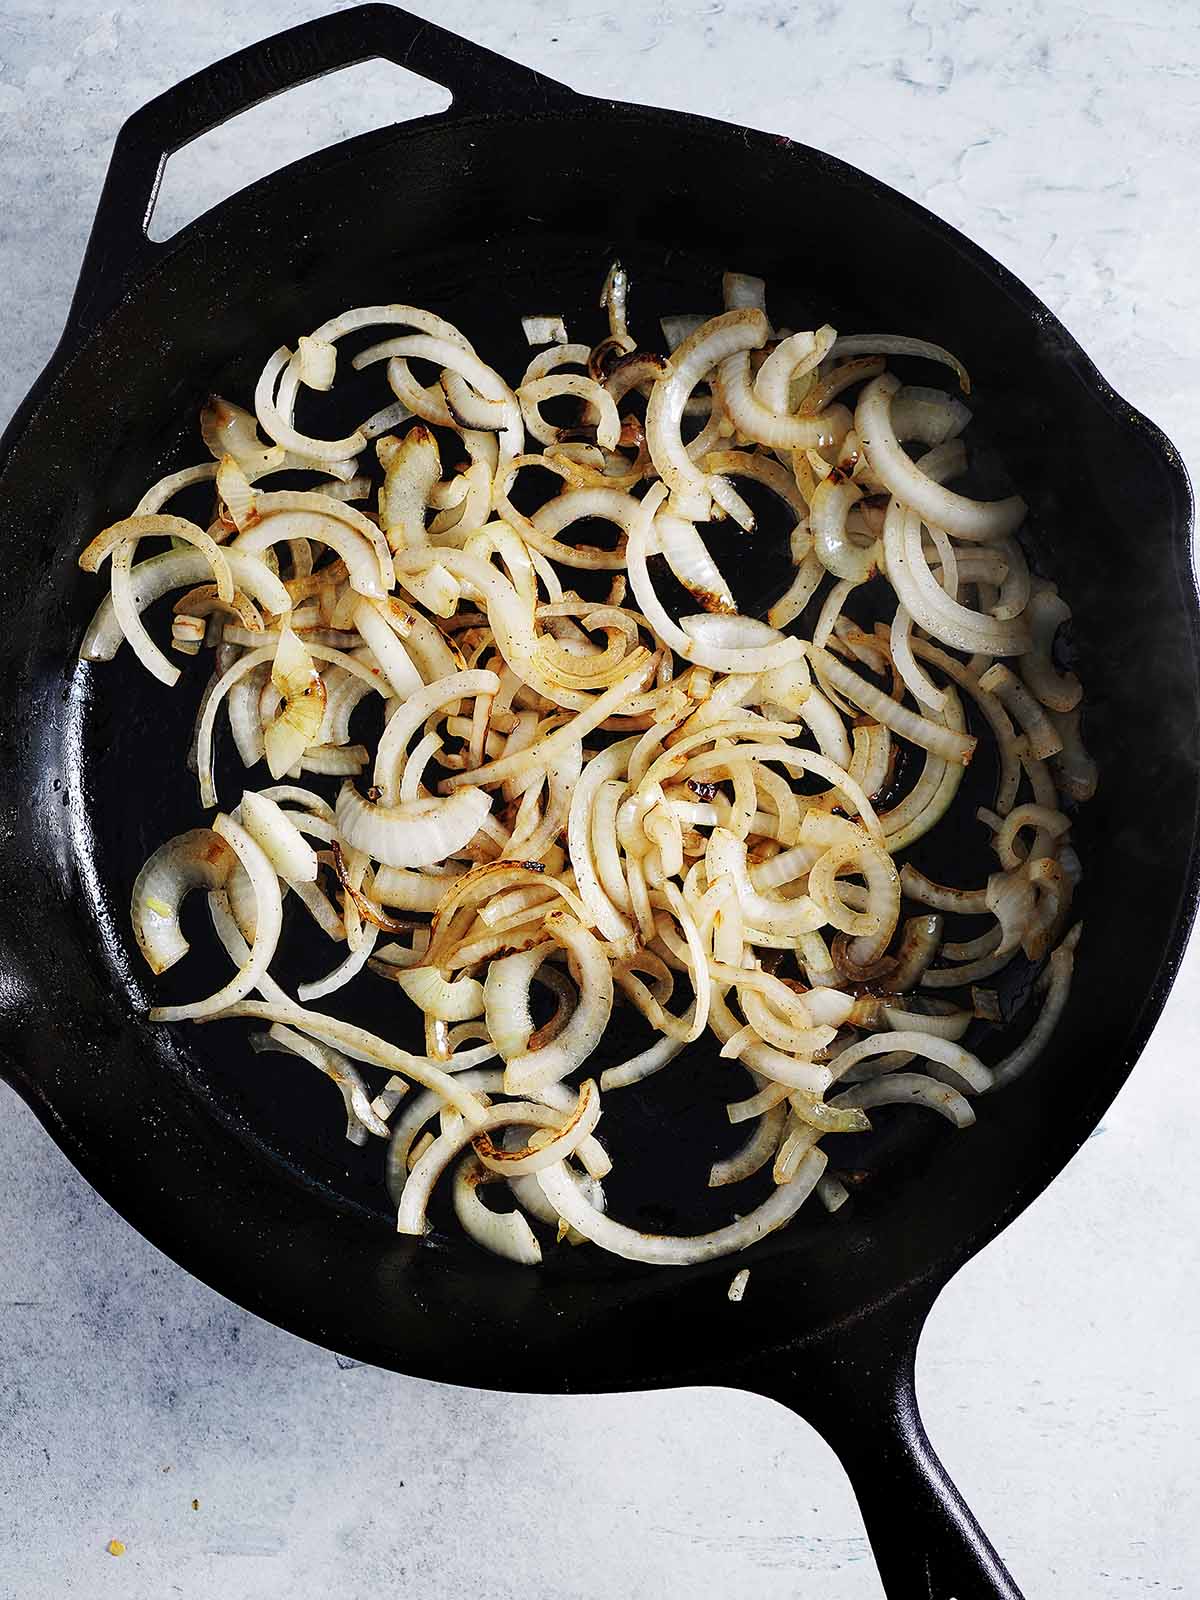 Sliced white onions are being cooked in a cast iron skillet.